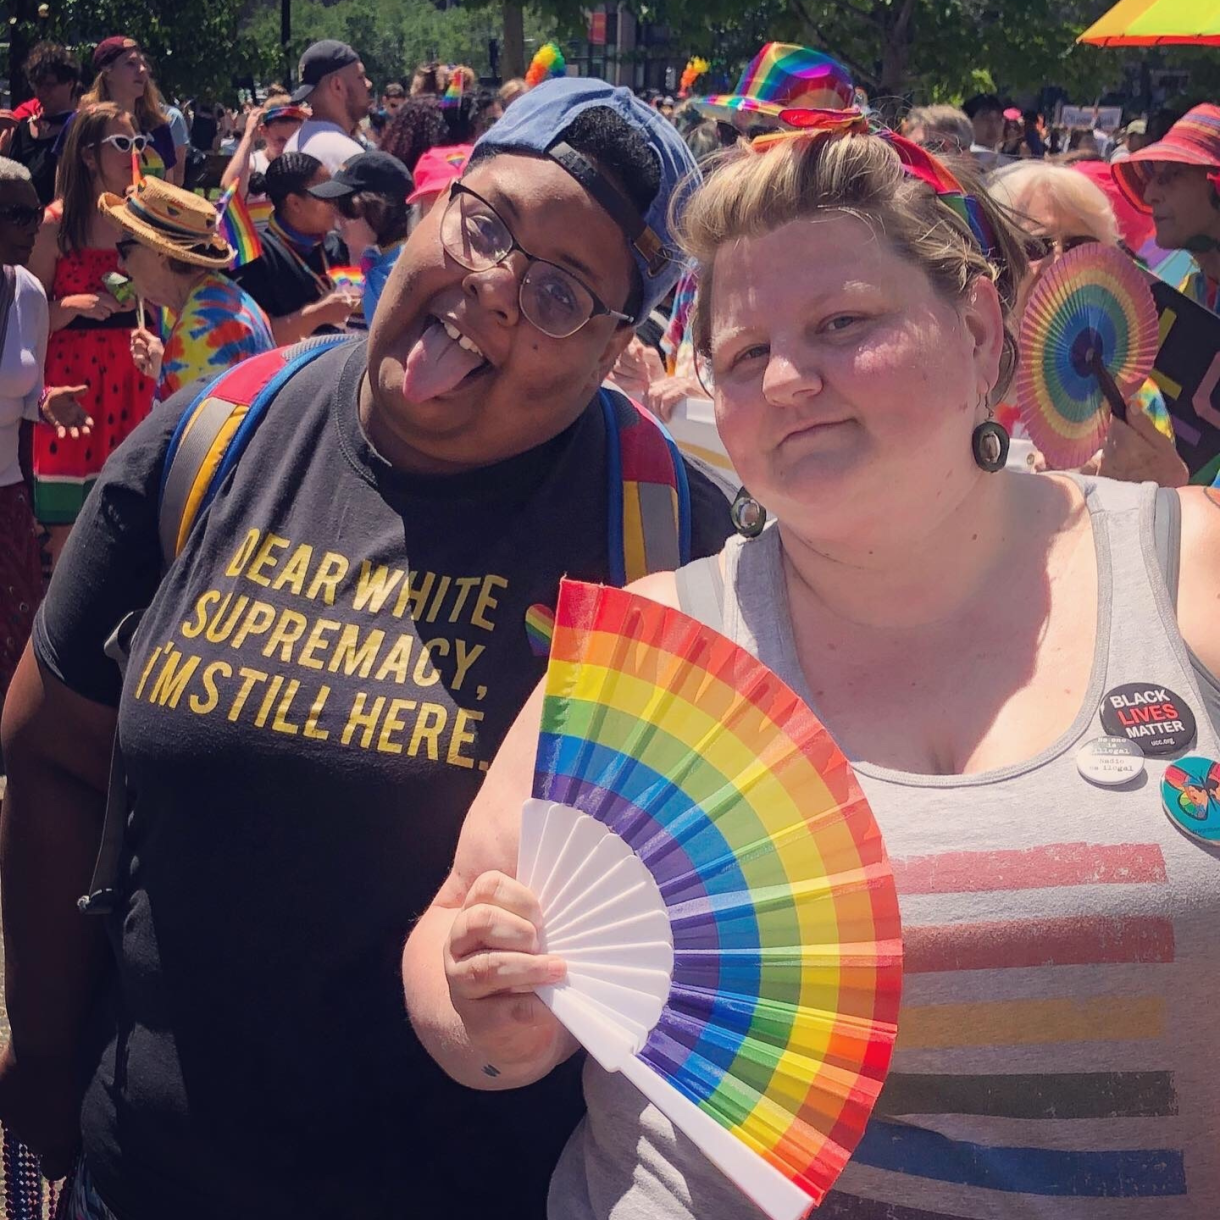 shea and Jane at a pride event. shea is wearing glasses, a backwards baseball cap, and a shirt that says "dear white supremacy, I'm still here" and Jane is wearing a shirt with several buttons including a "Black Lives Matter" button and is holding a rainbow fan and wearing a rainbow headband. a crowd of rainbow-clad people can be seen enjoying themselves behind them.